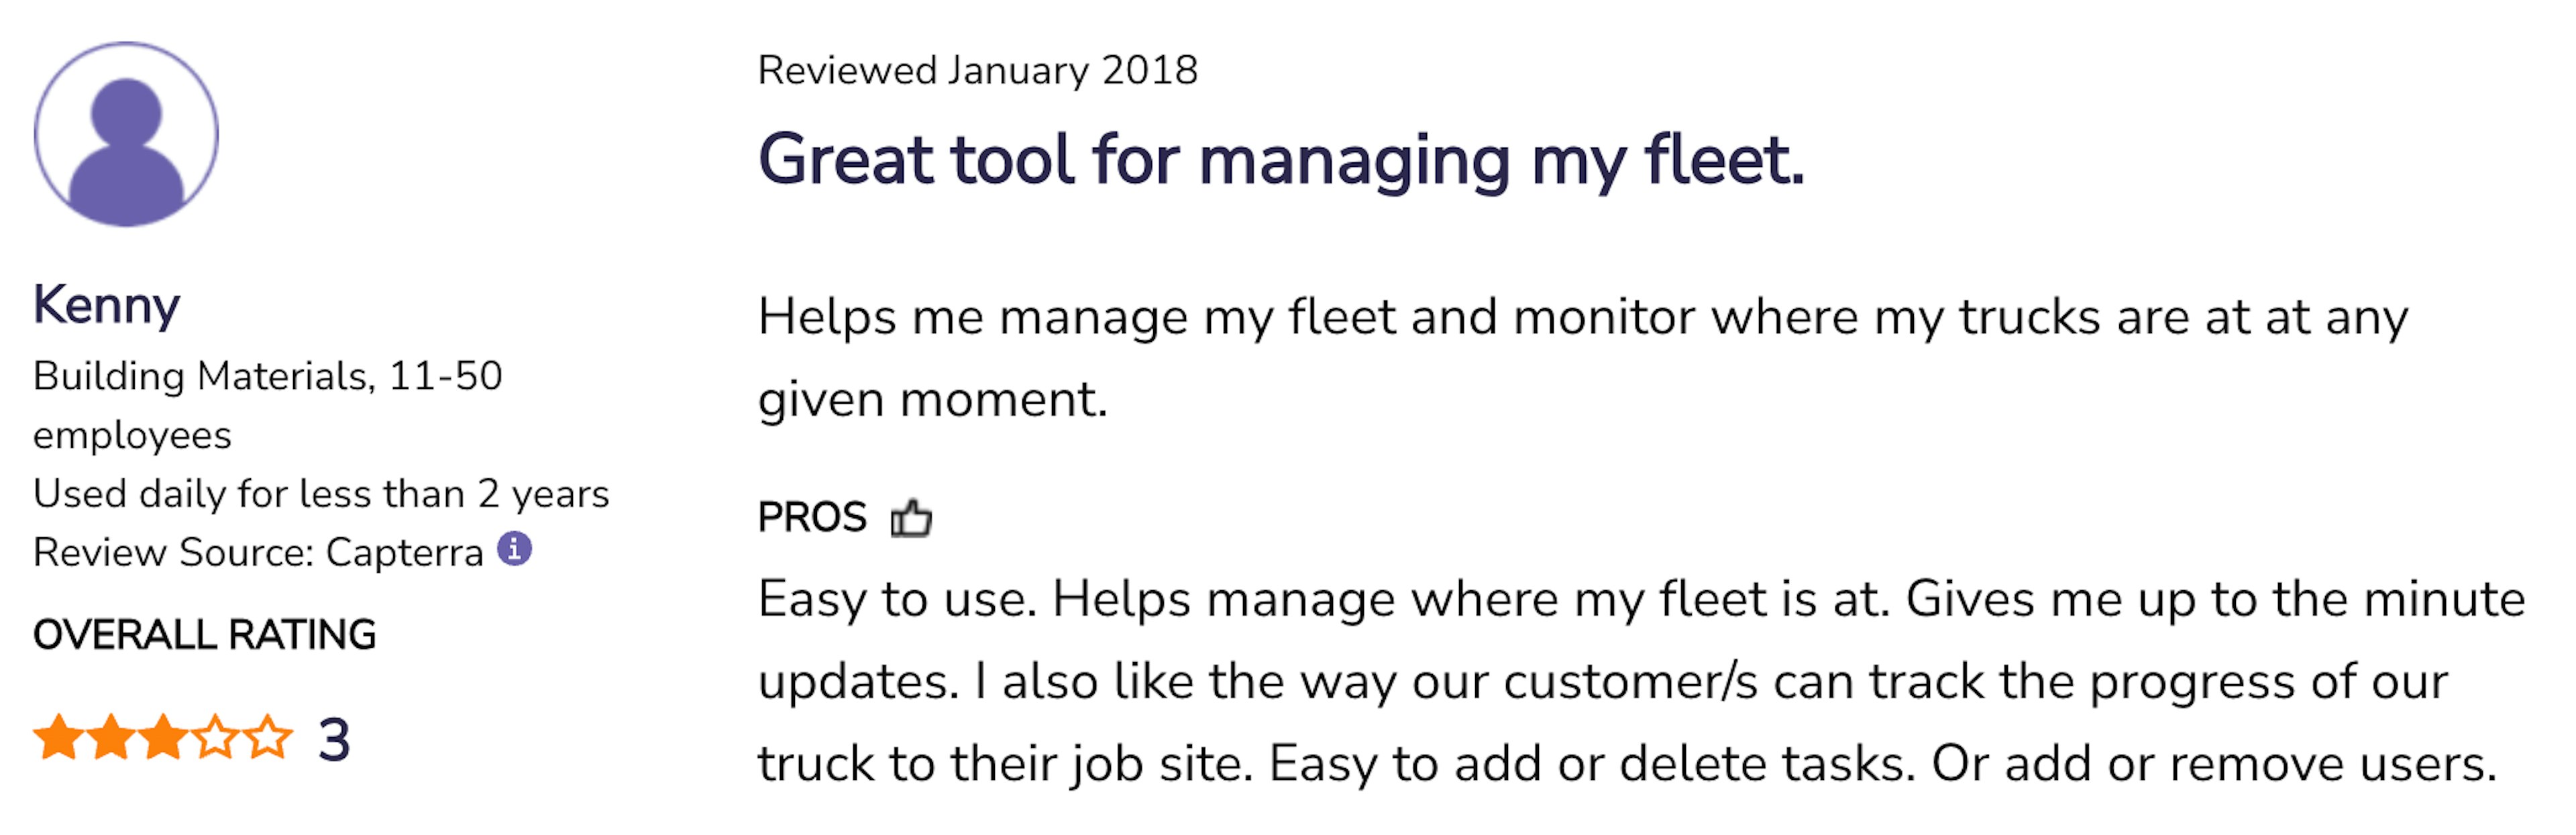 Positive Capterra product review of Onfleet